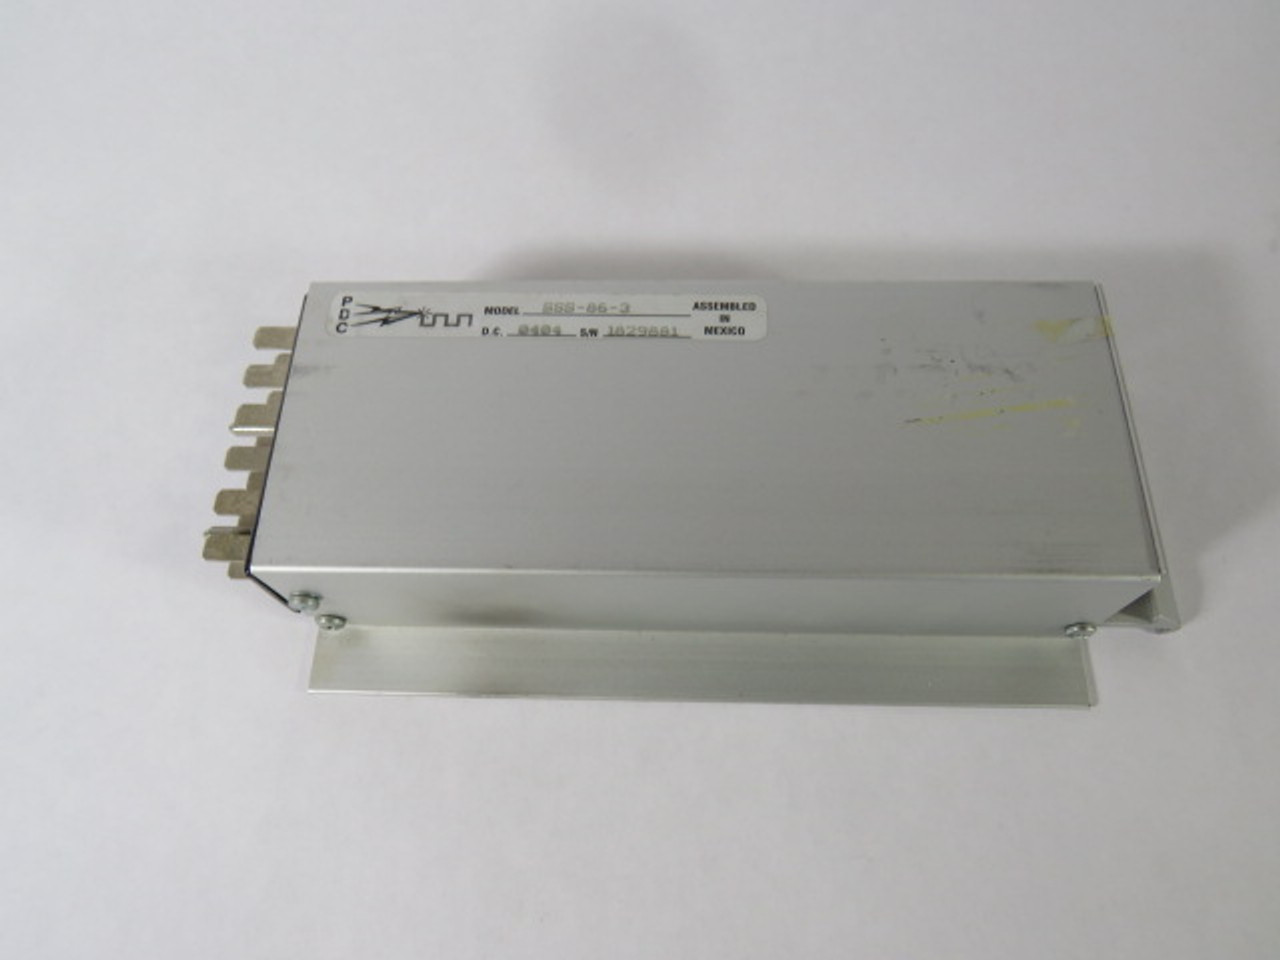 PDC SSS-86-3 Load Switch Model 200 USED